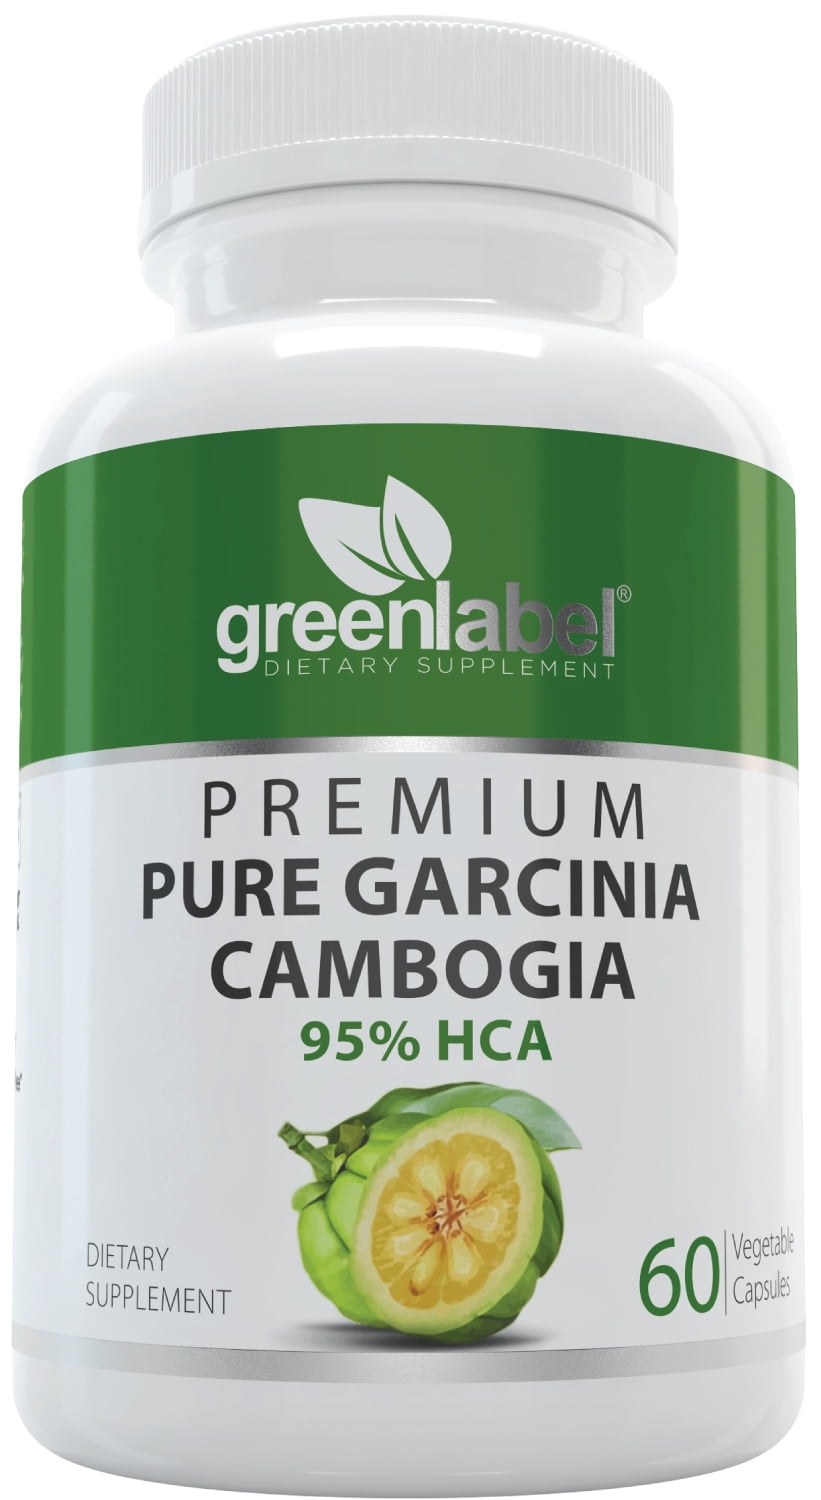 what is pure garcinia cambogia